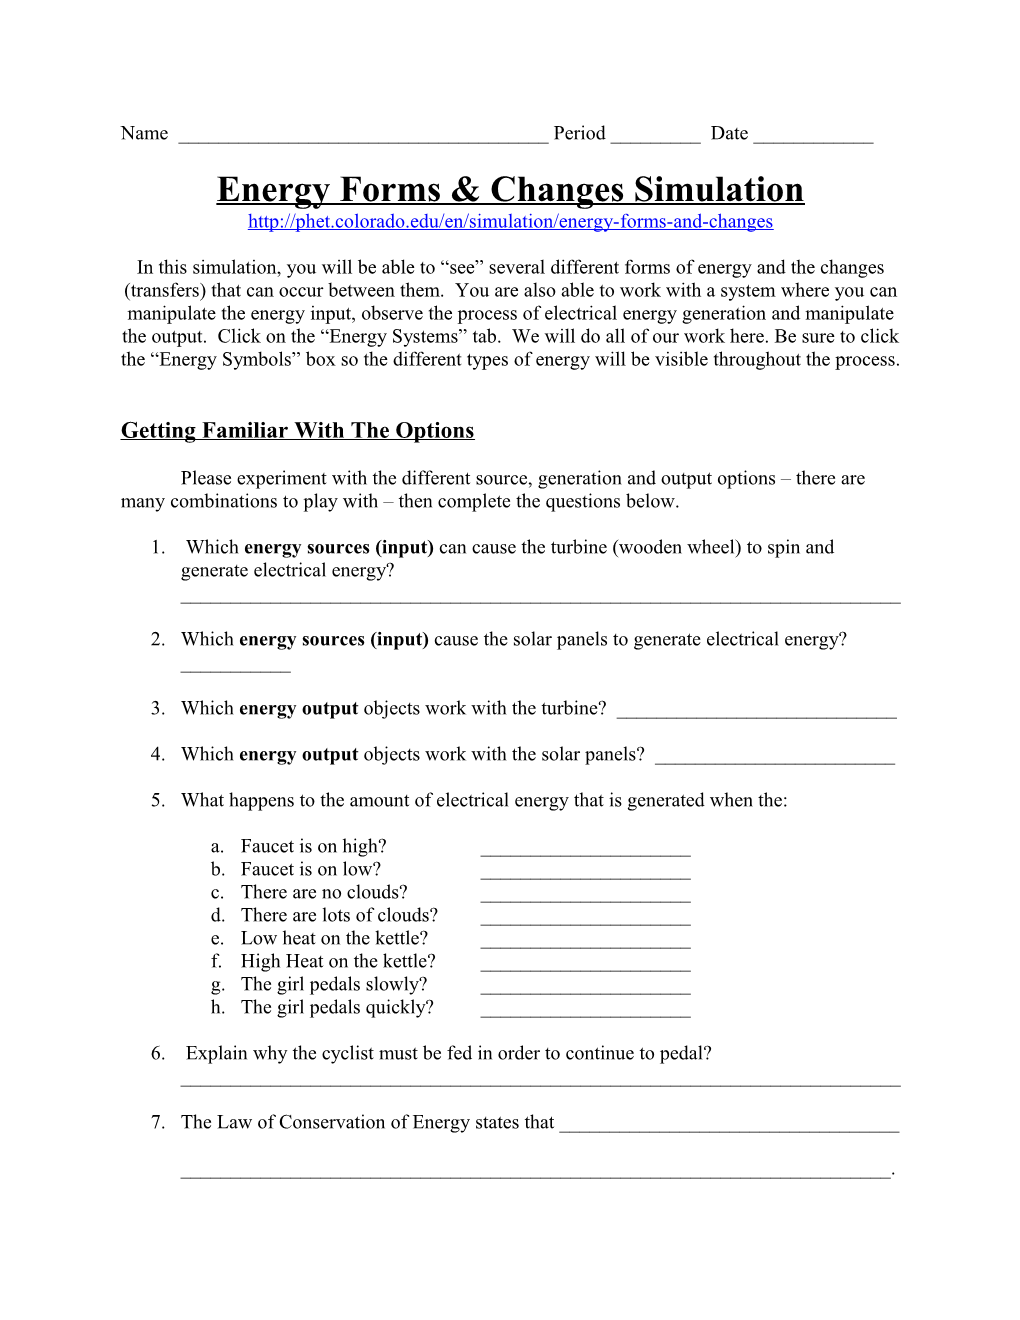 Energy Forms & Changes Simulation